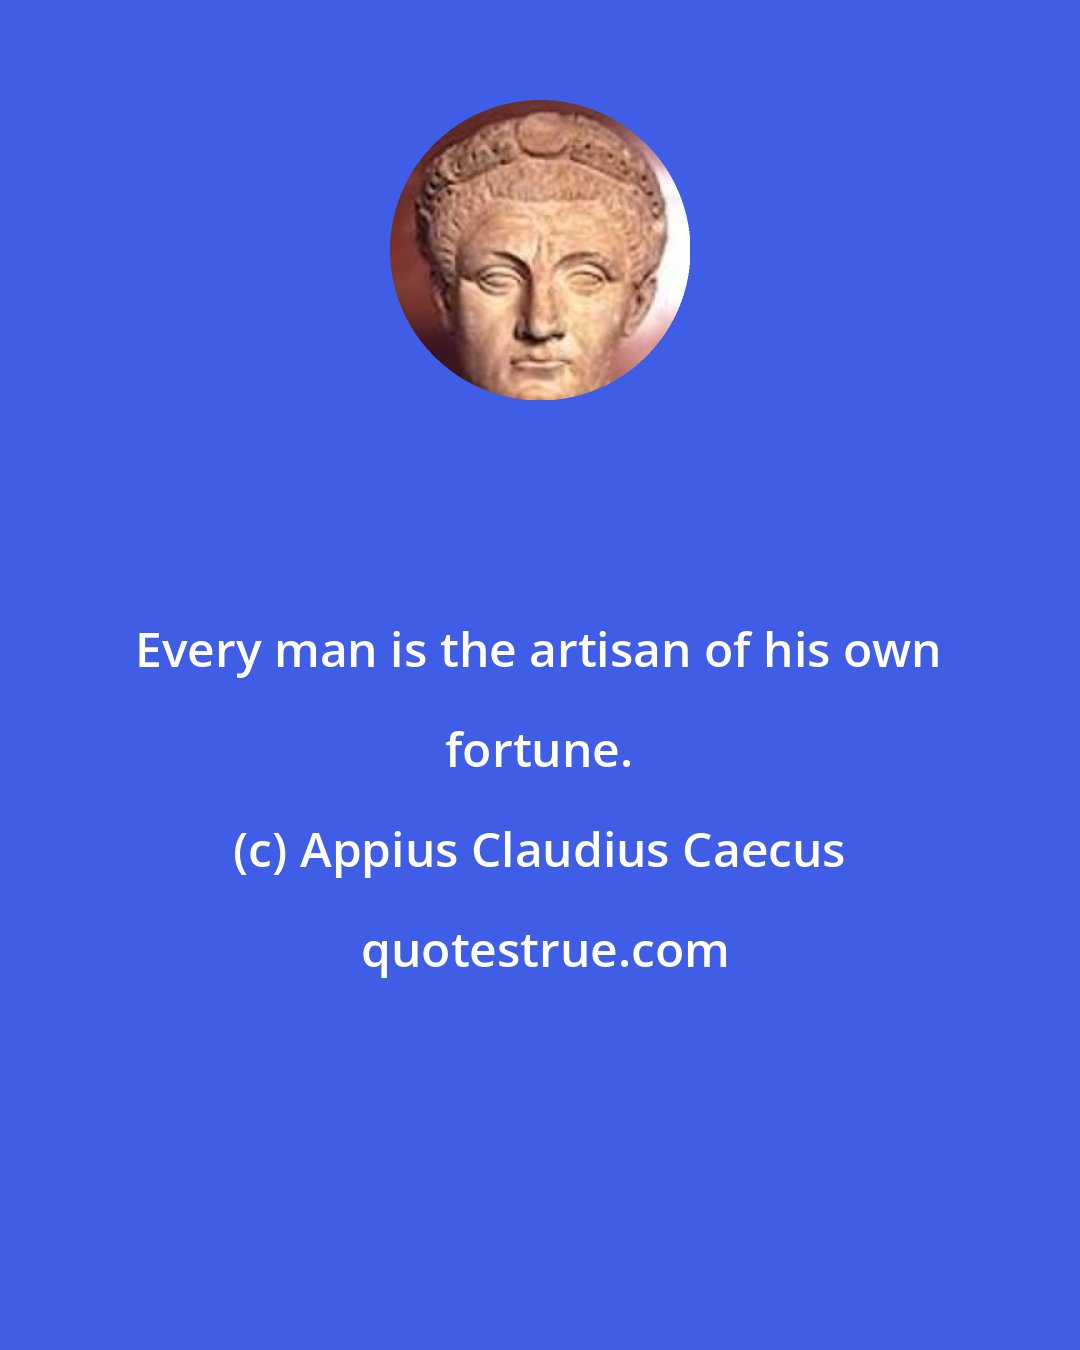 Appius Claudius Caecus: Every man is the artisan of his own fortune.